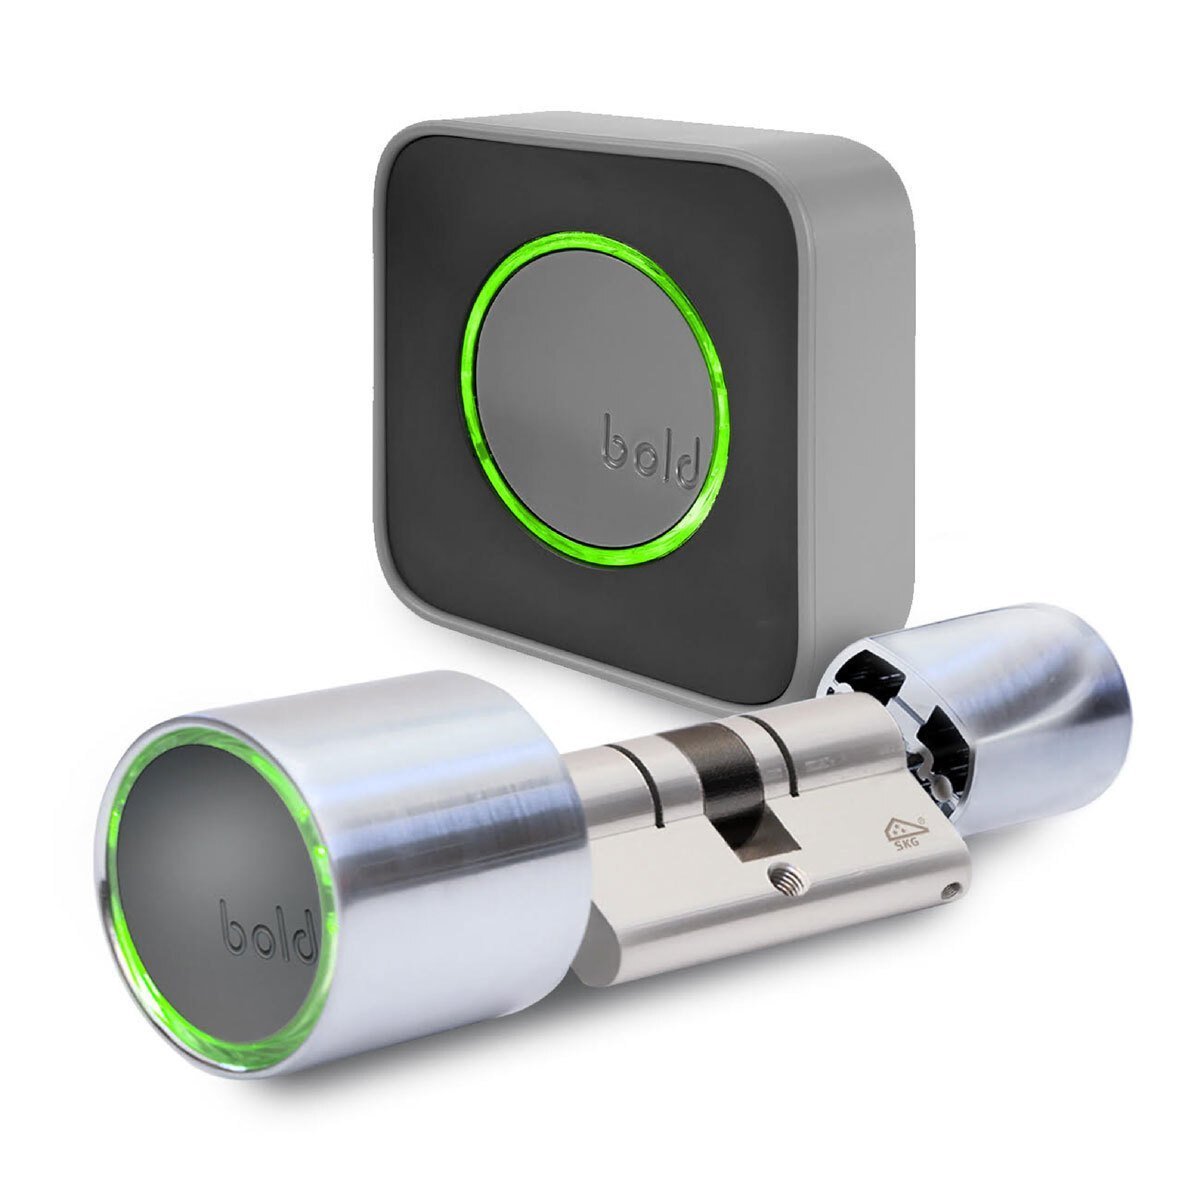 Bold Smart Door Lock with Connect - Lock Size: SX-33 - Signature Retail Stores